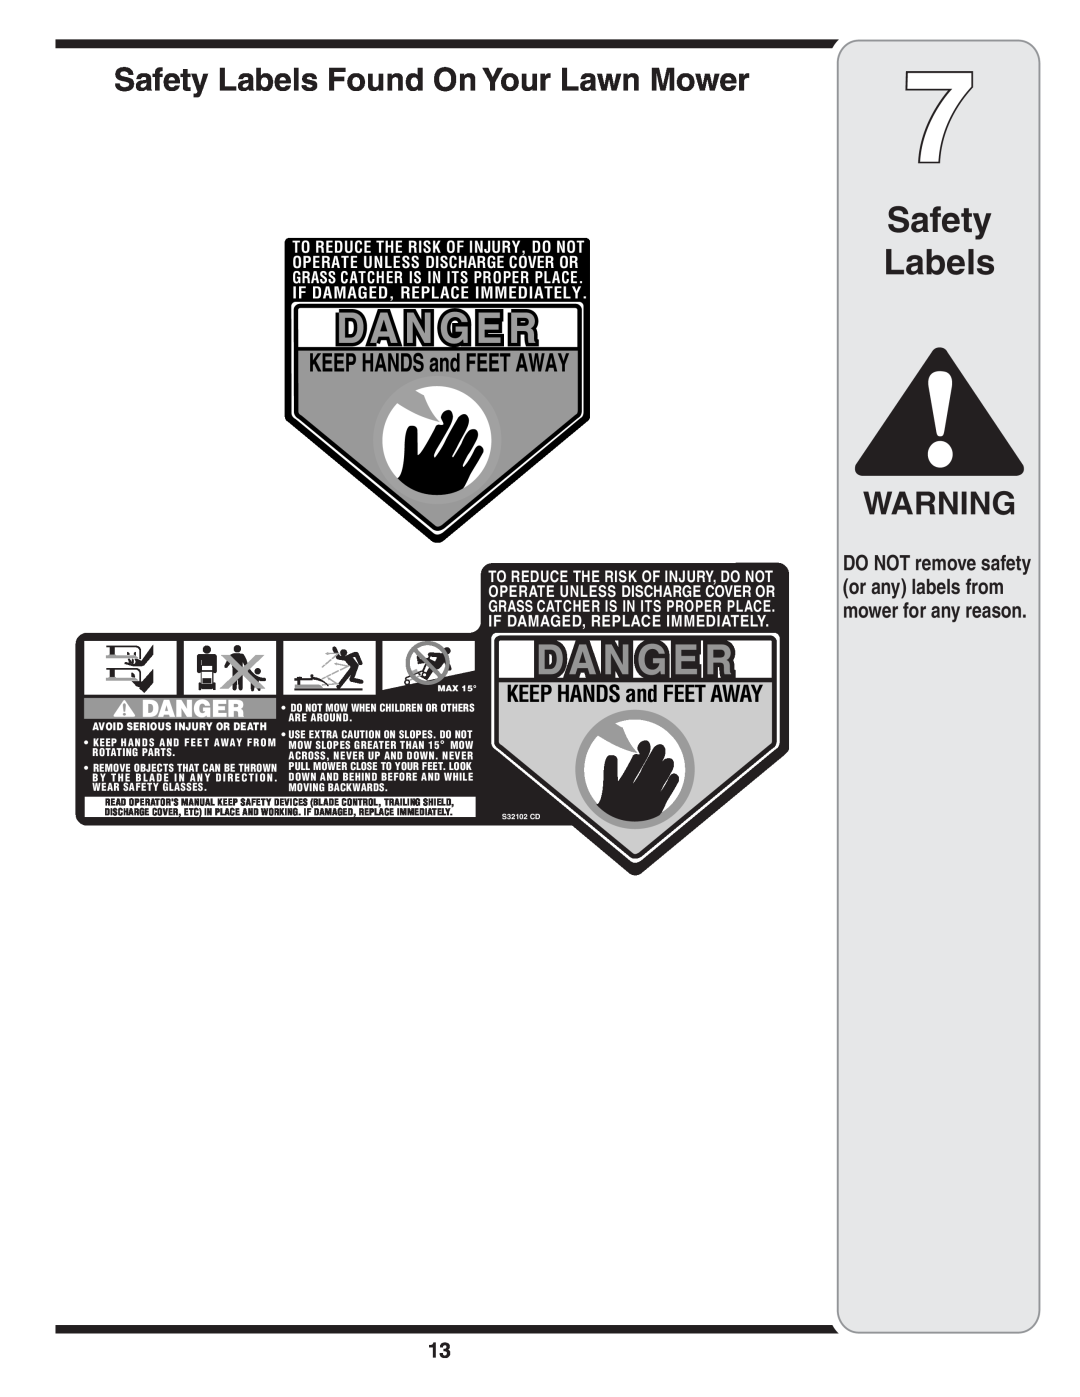 Troy-Bilt Series 540 Safety Labels Found On Your Lawn Mower, KEEP HANDS and FEET AWAY, Avoid Serious Injury Or Death 